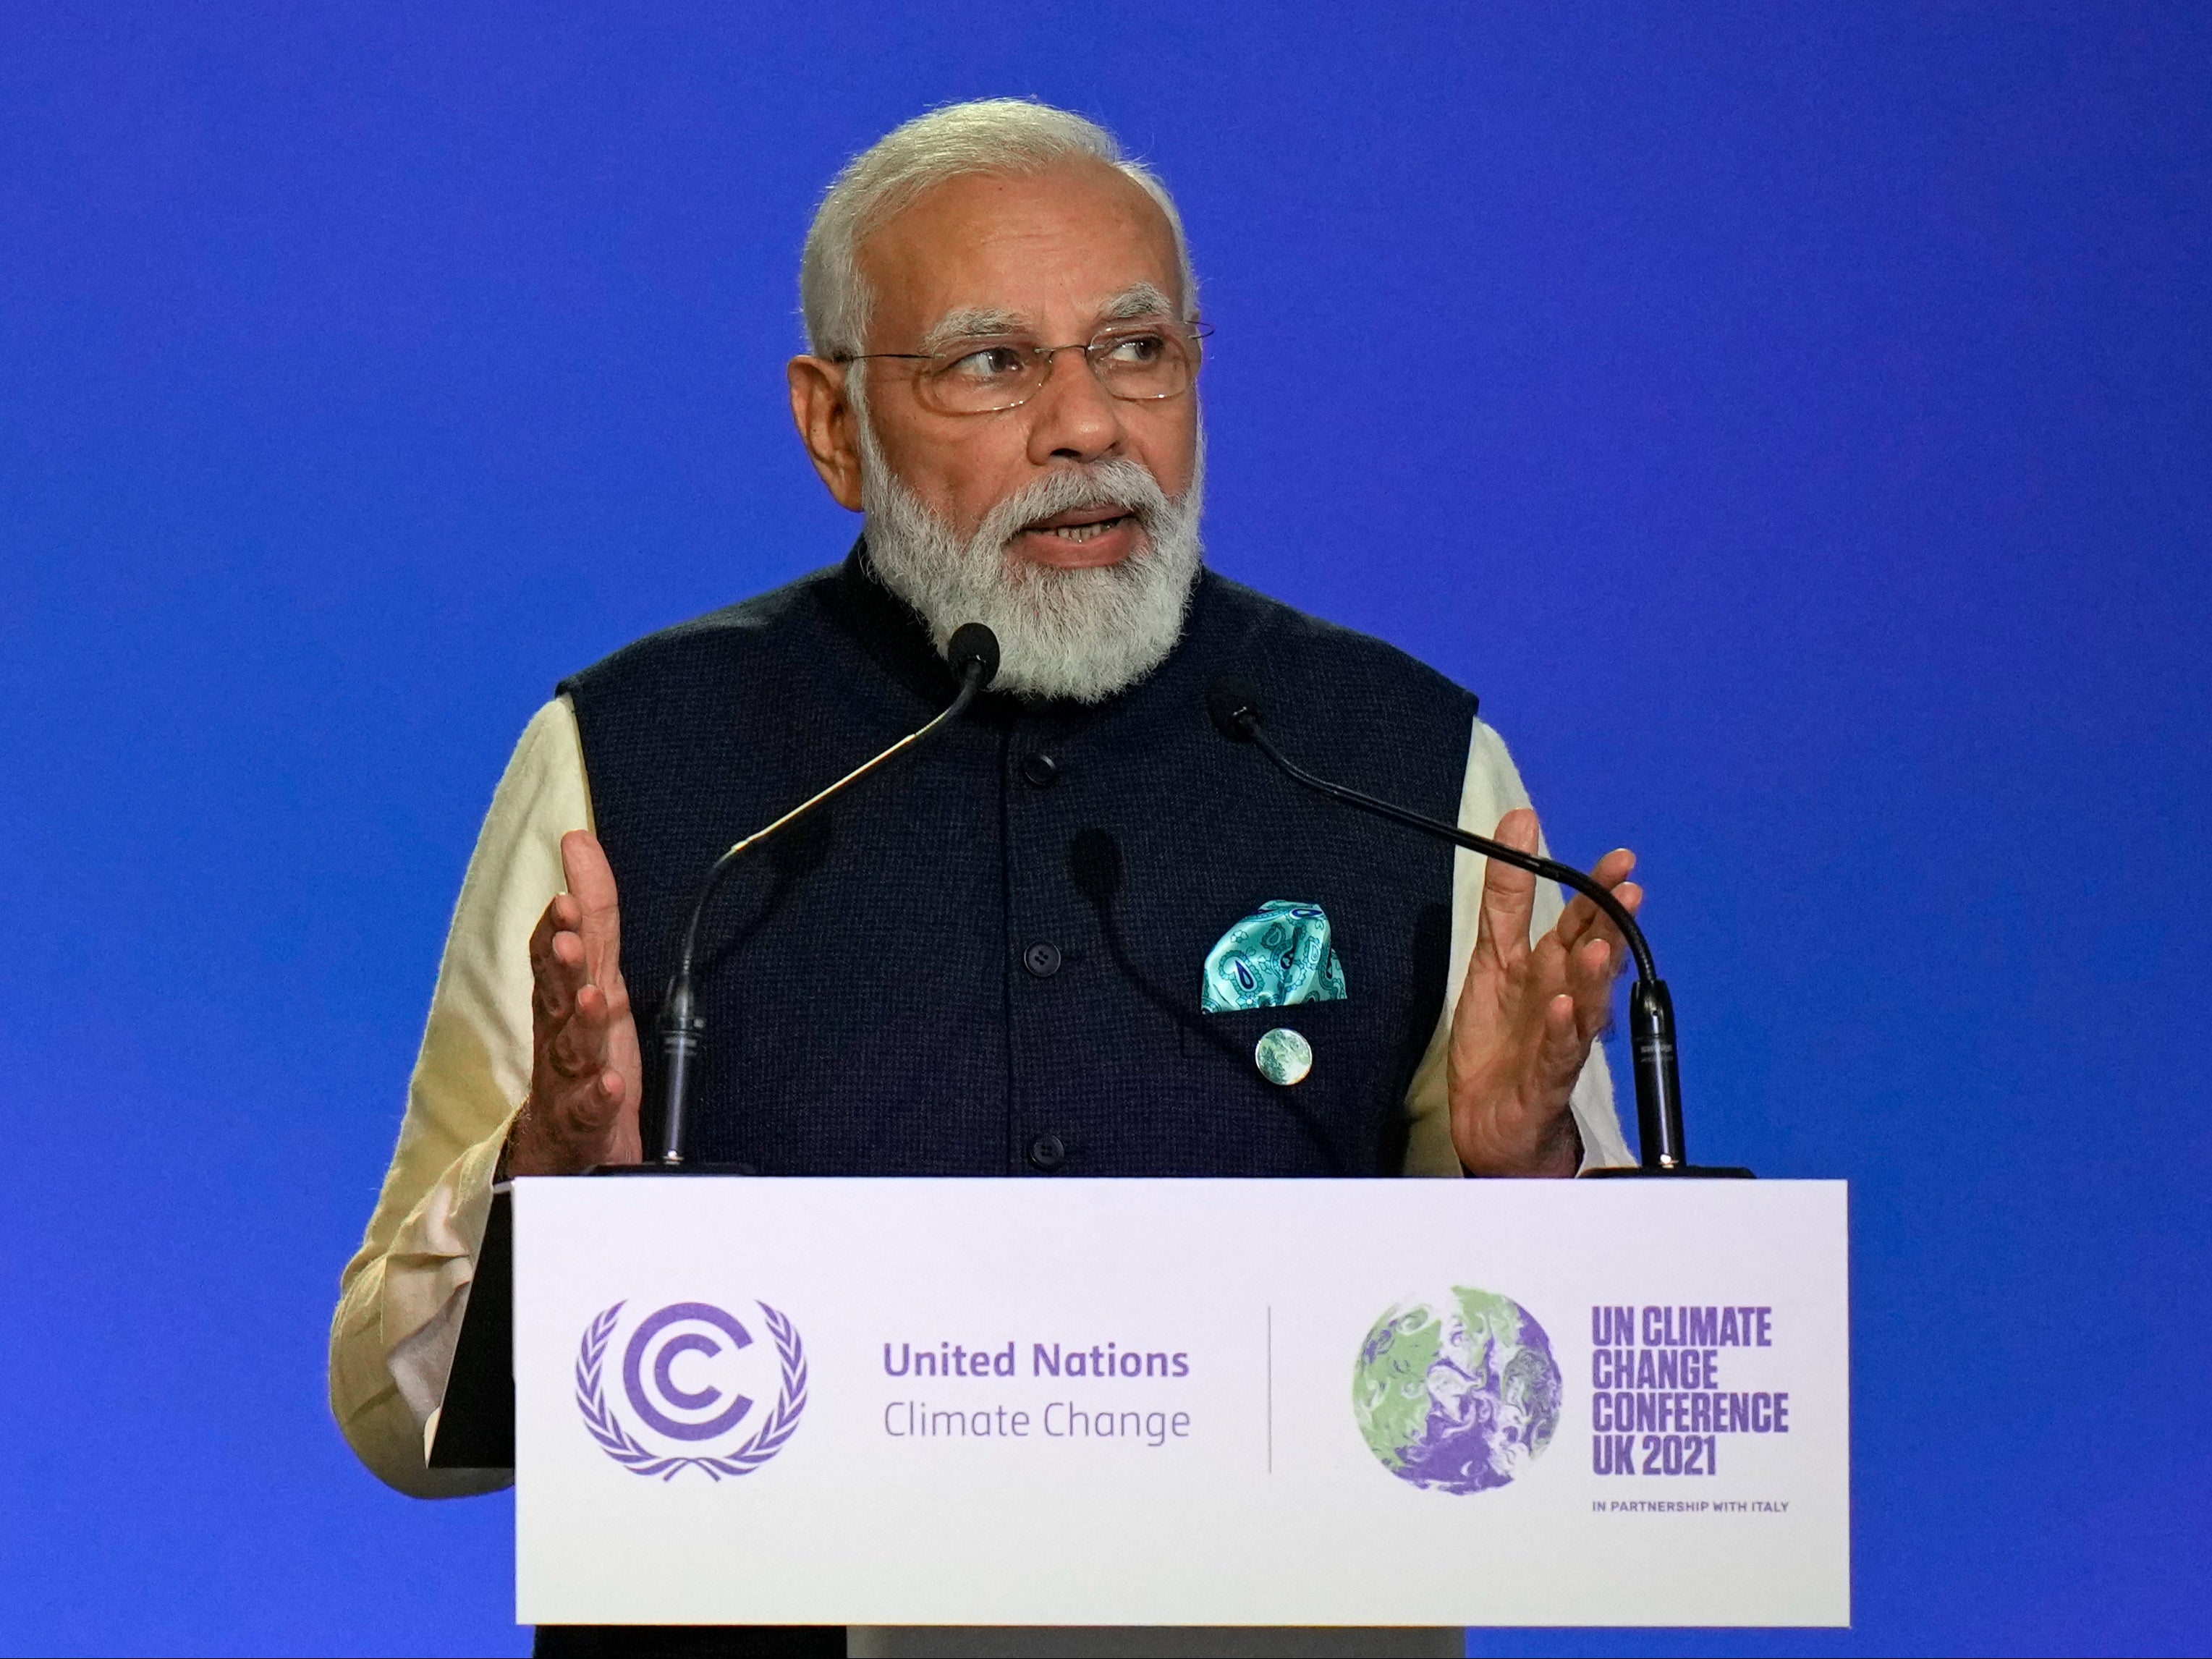 India will hit net zero emissions by 2070, PM Narendra Modi told the Cop26 climate summit in Glasgow